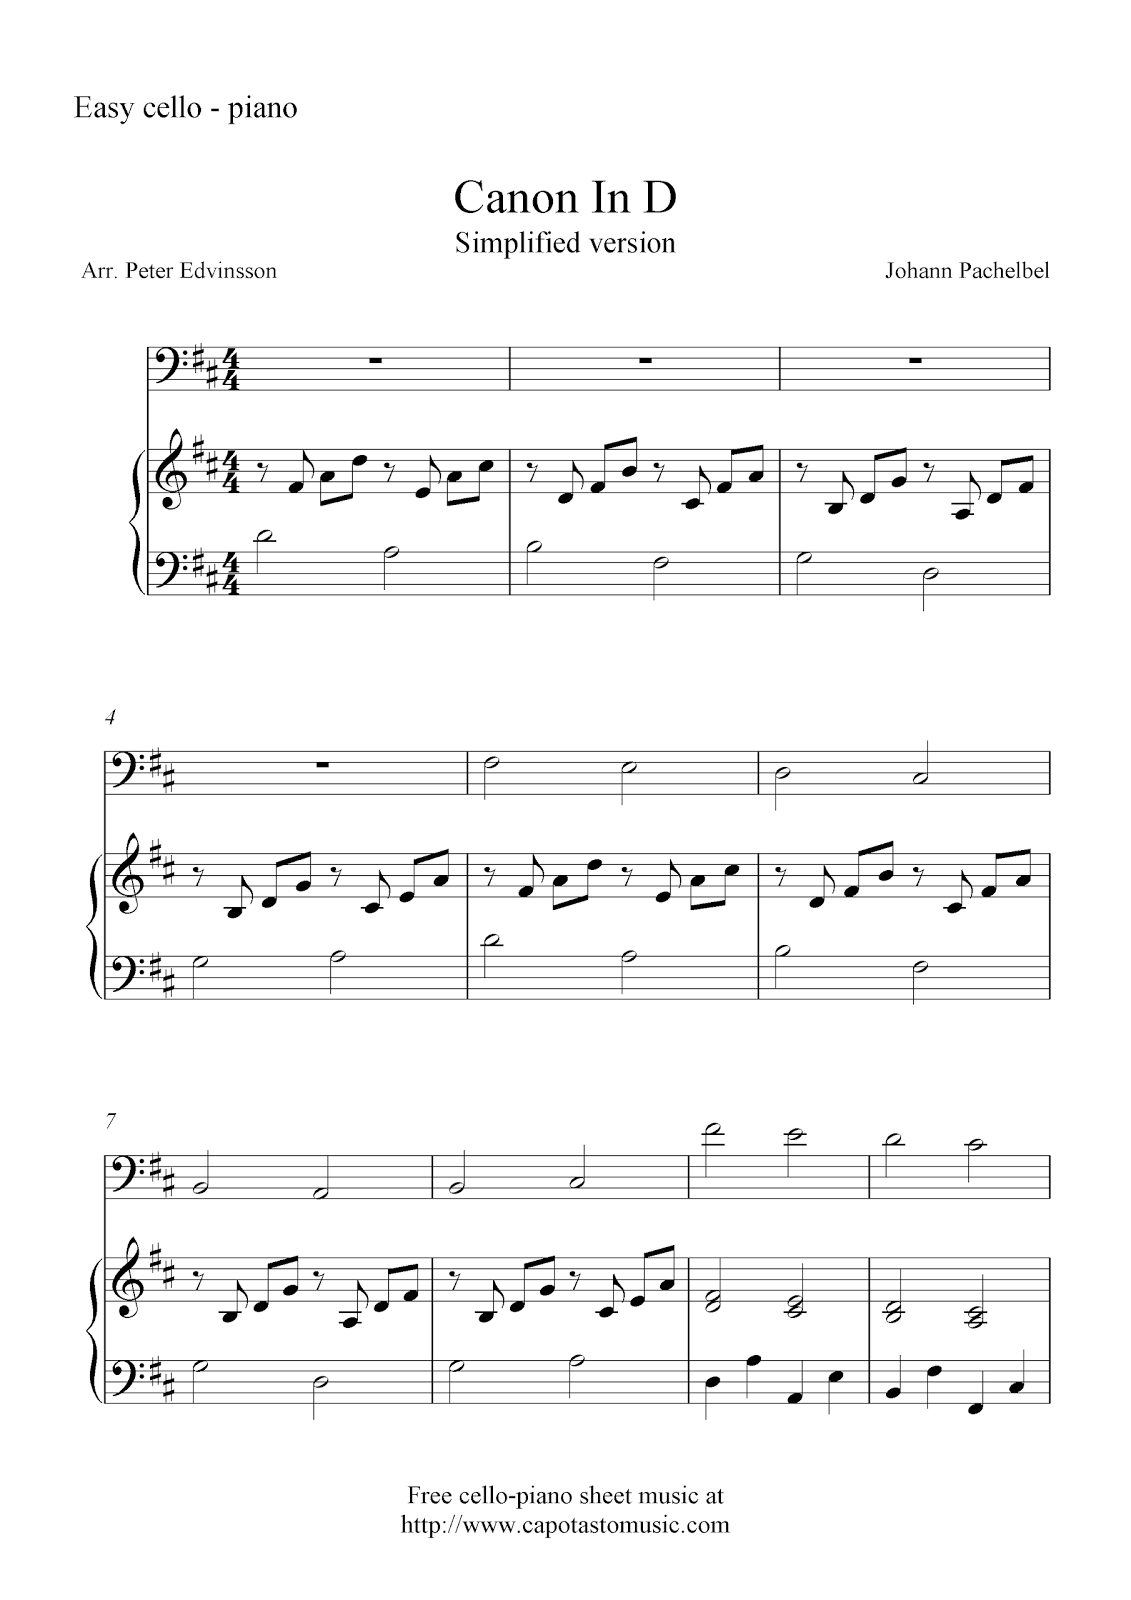 Free Cello And Piano Sheet Music, Canon In D - Canon In D Piano Sheet Music Free Printable